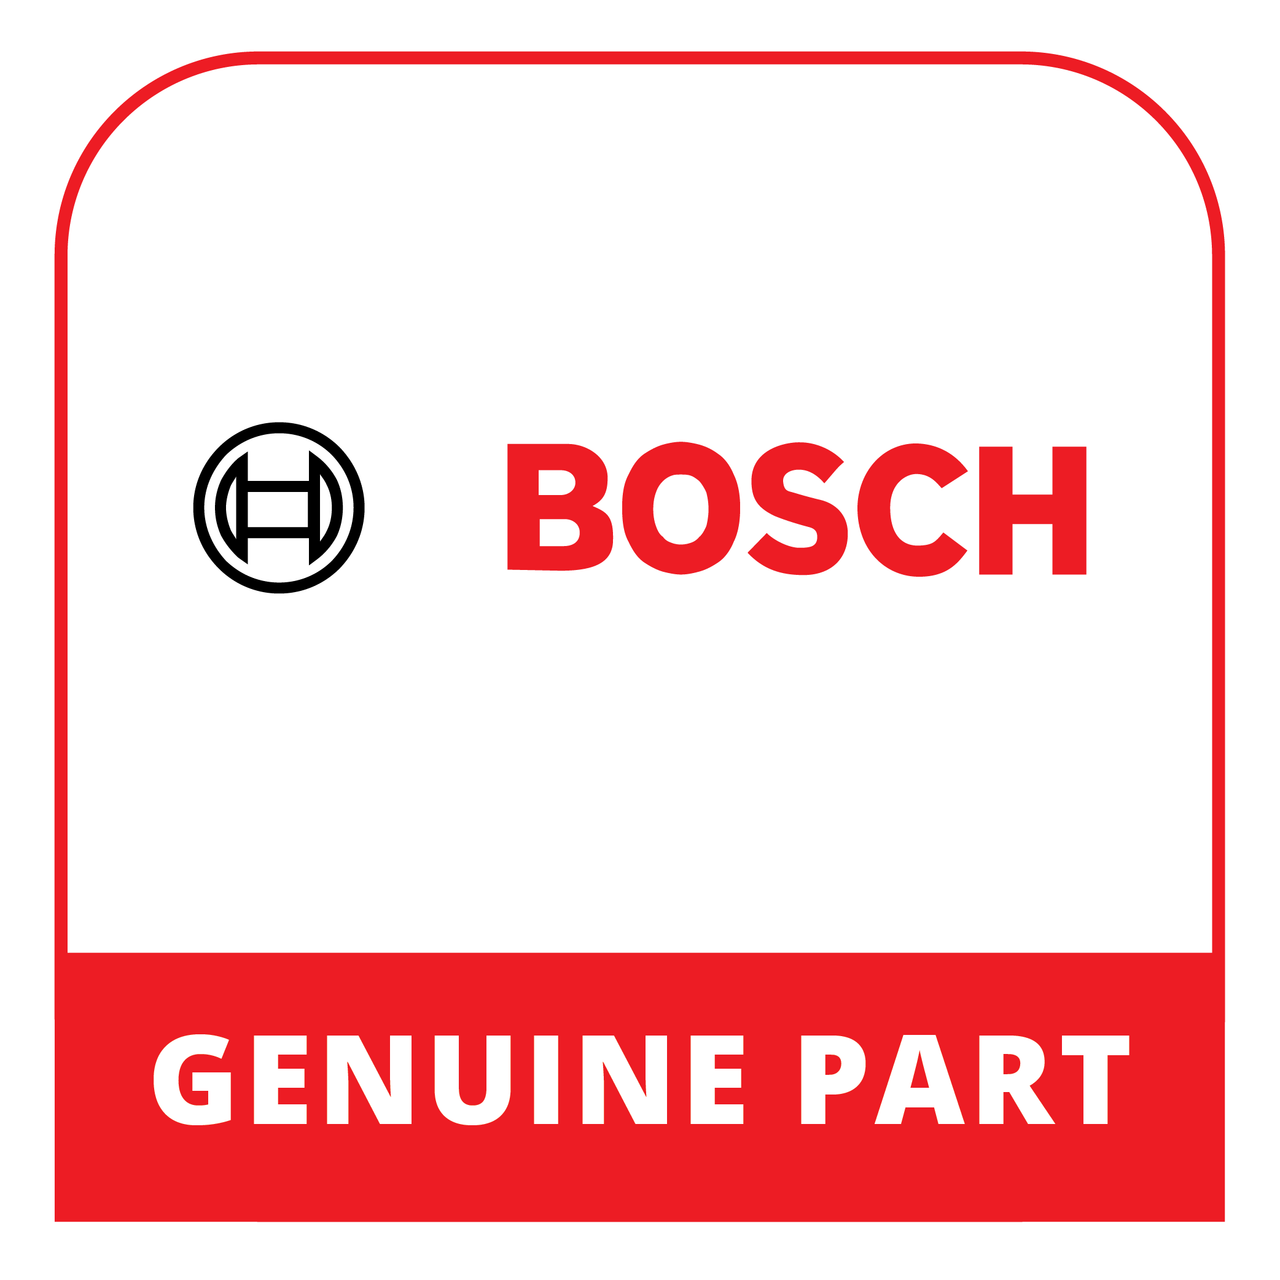 Bosch 00751058 - Handle-Cap Shaped - Genuine Bosch (Thermador) Part